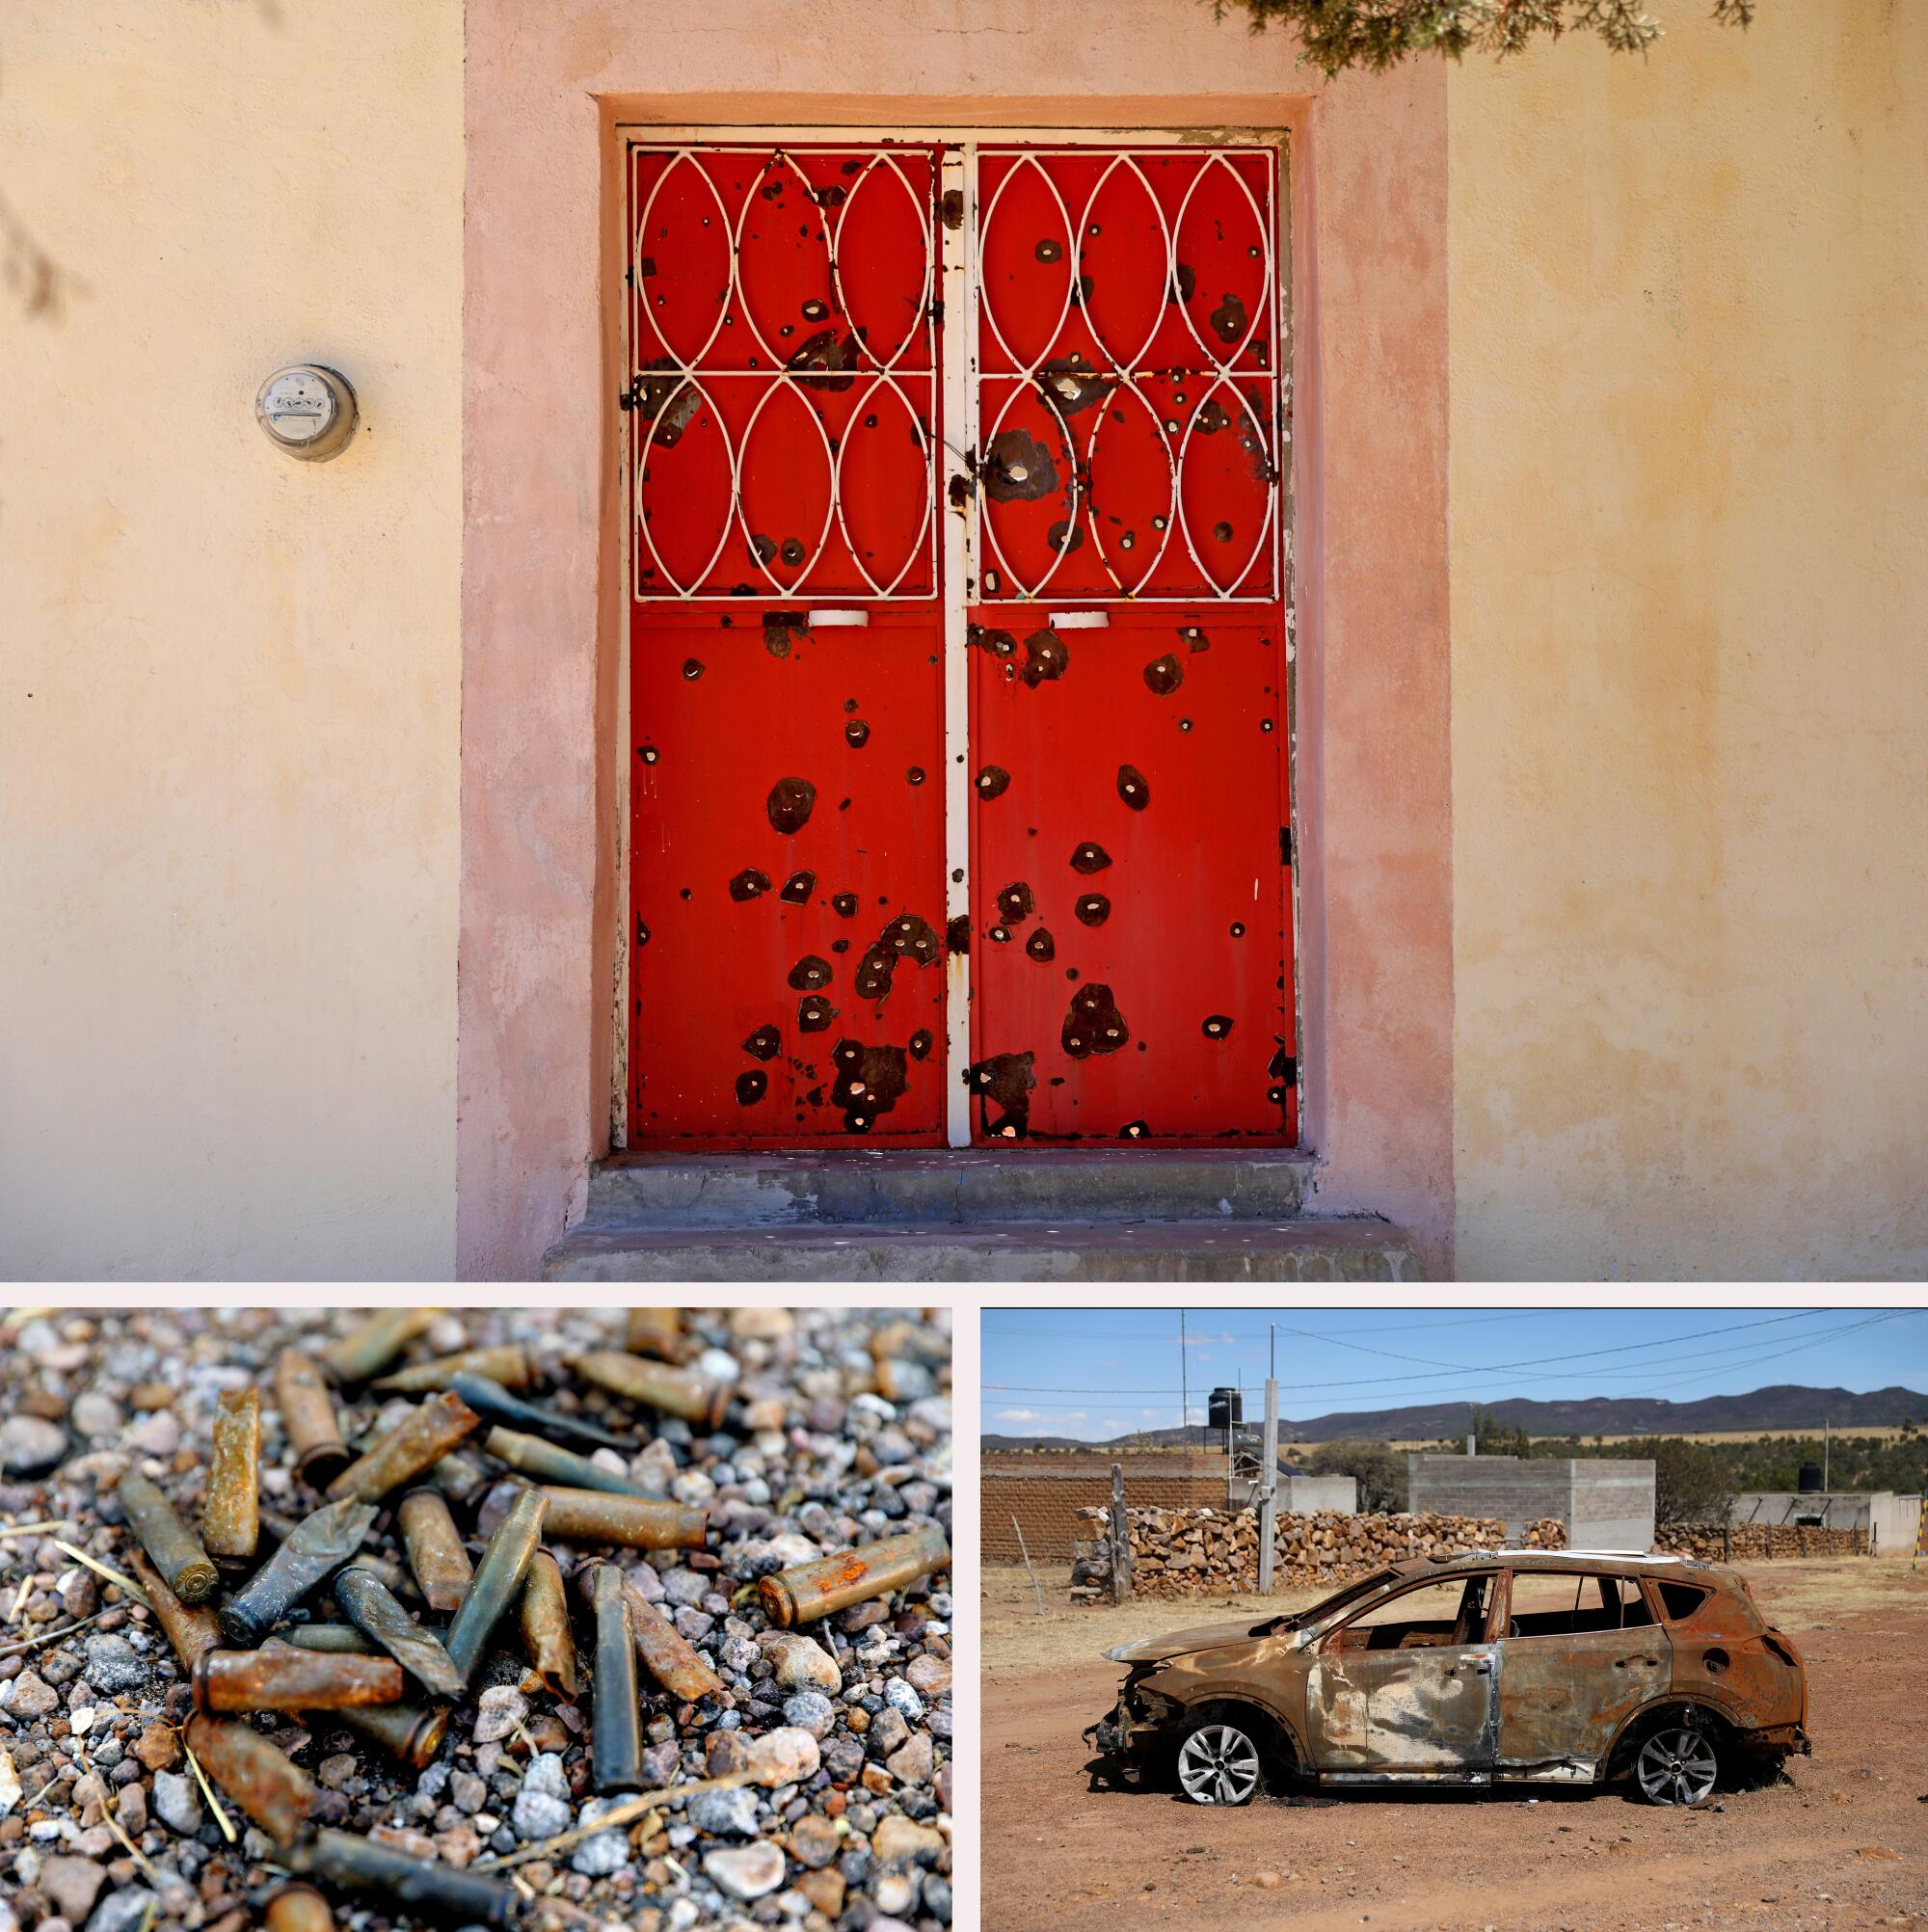 Three separate images show a bullet ridden door of an abandoned house, bullet casings on a roadway, a burned vehicle.